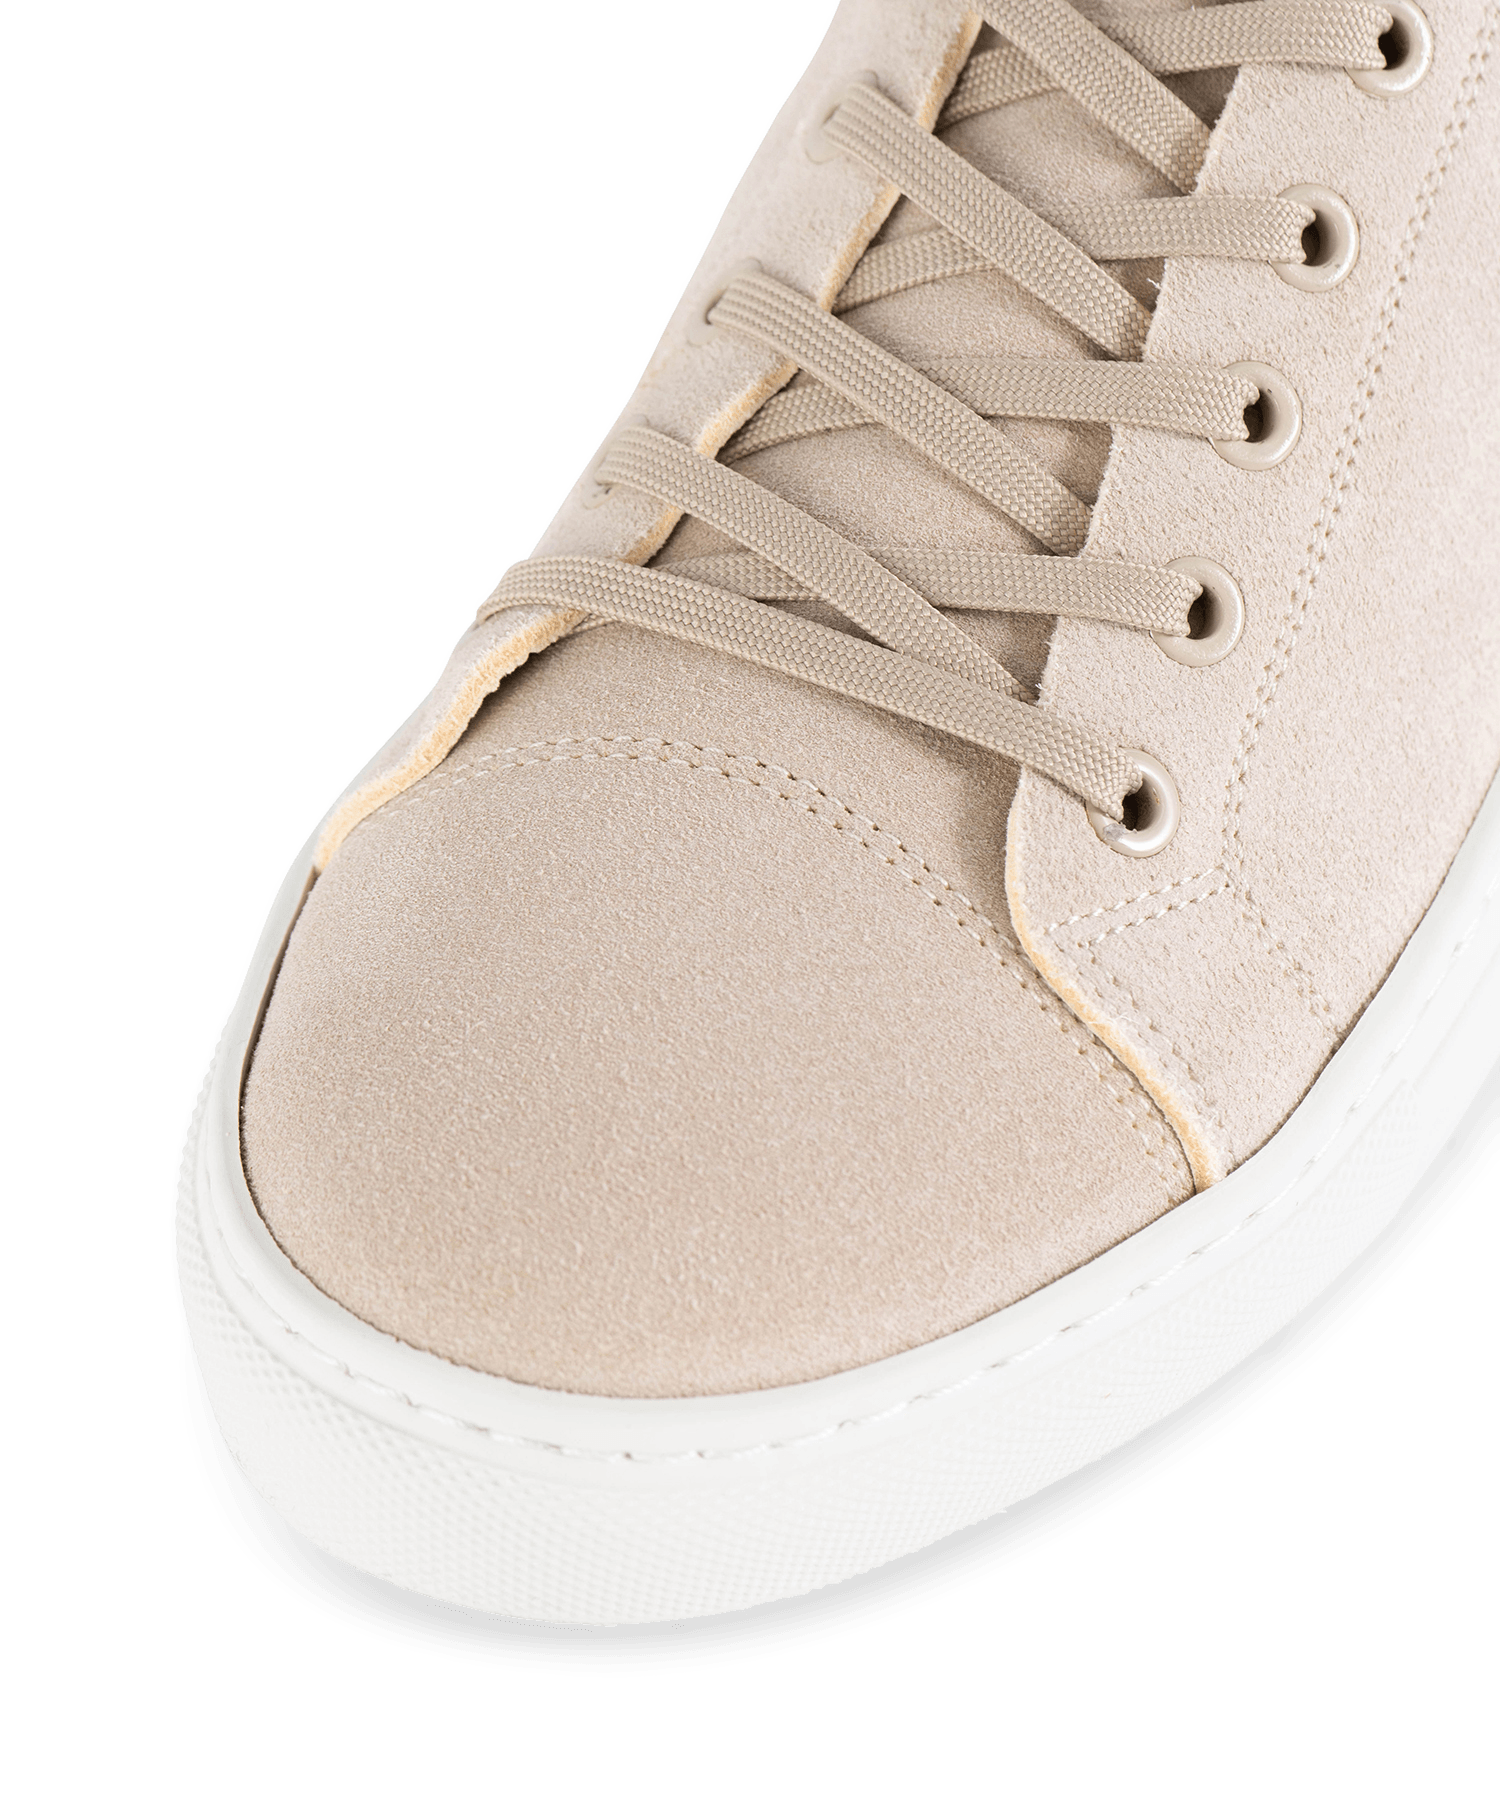 SNEAKERS SUEDE 40 / Beige / taupe